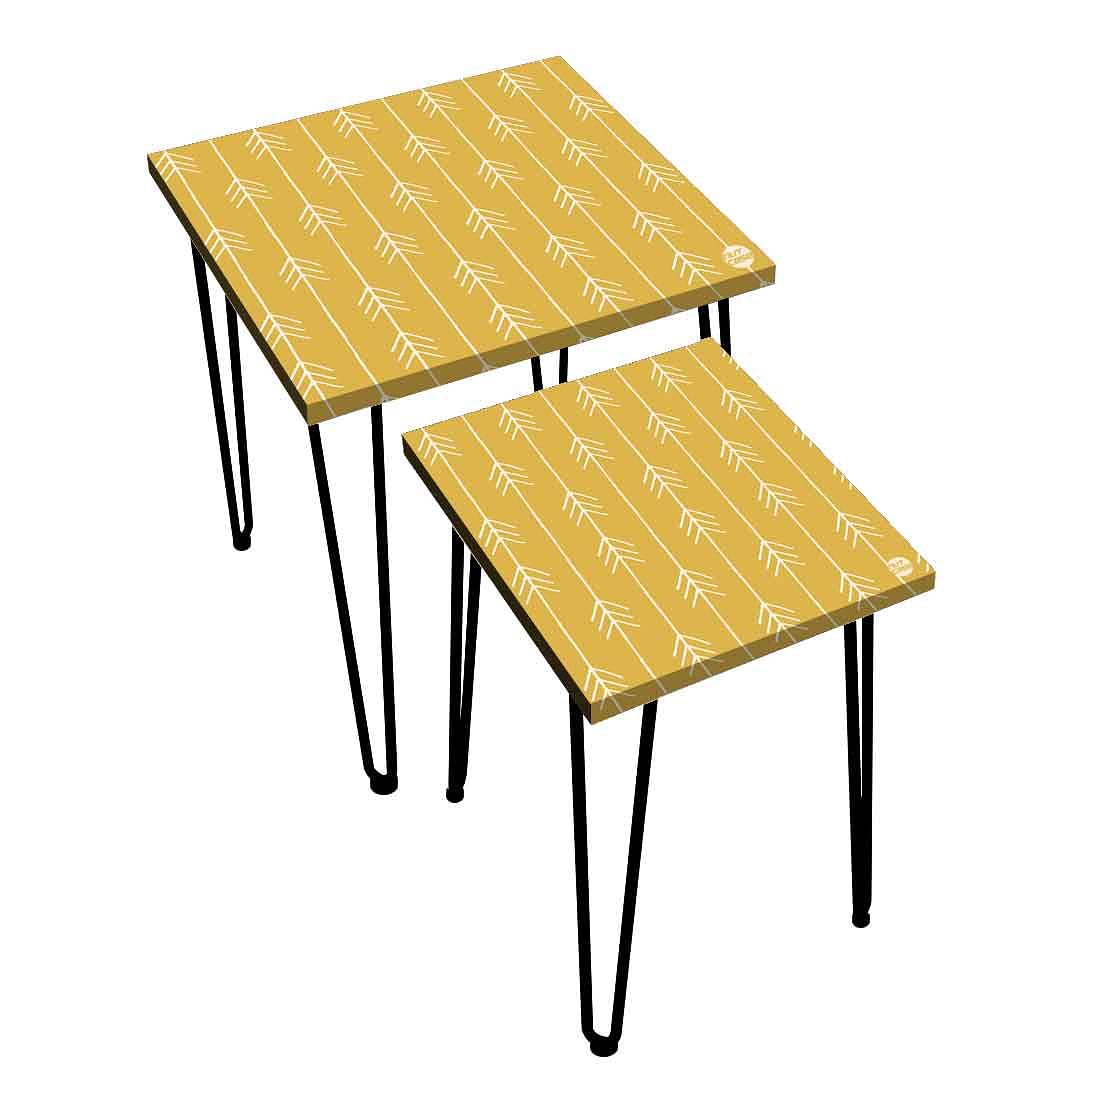 Arrow End Printed 2 Piece Nesting Tables for Tea, Coffee, Side and Corners Online in India Nutcase